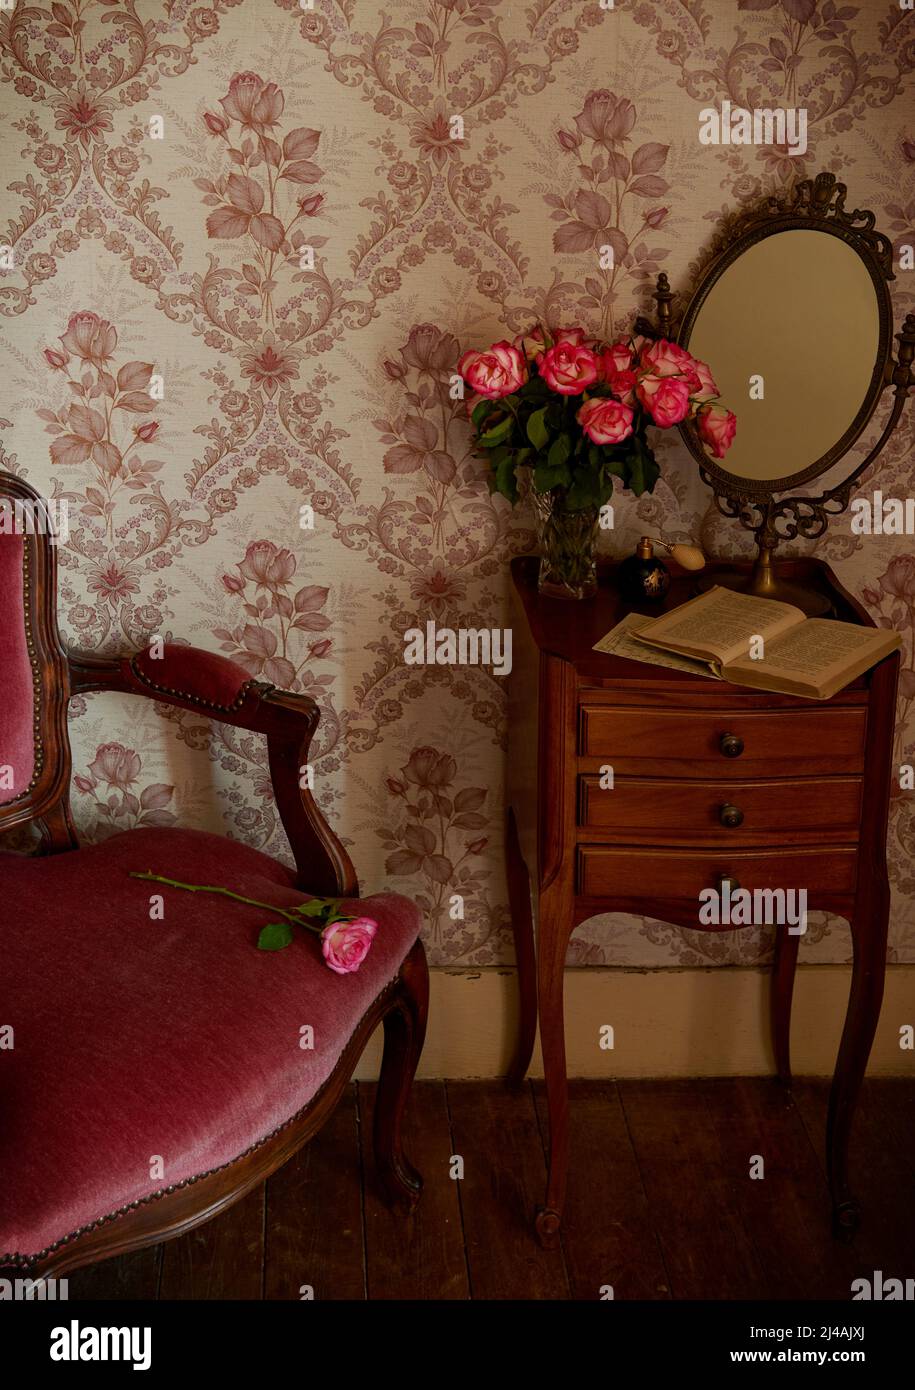 Vintage room with velvet armchair, antique mirror, pink roses and old book Stock Photo